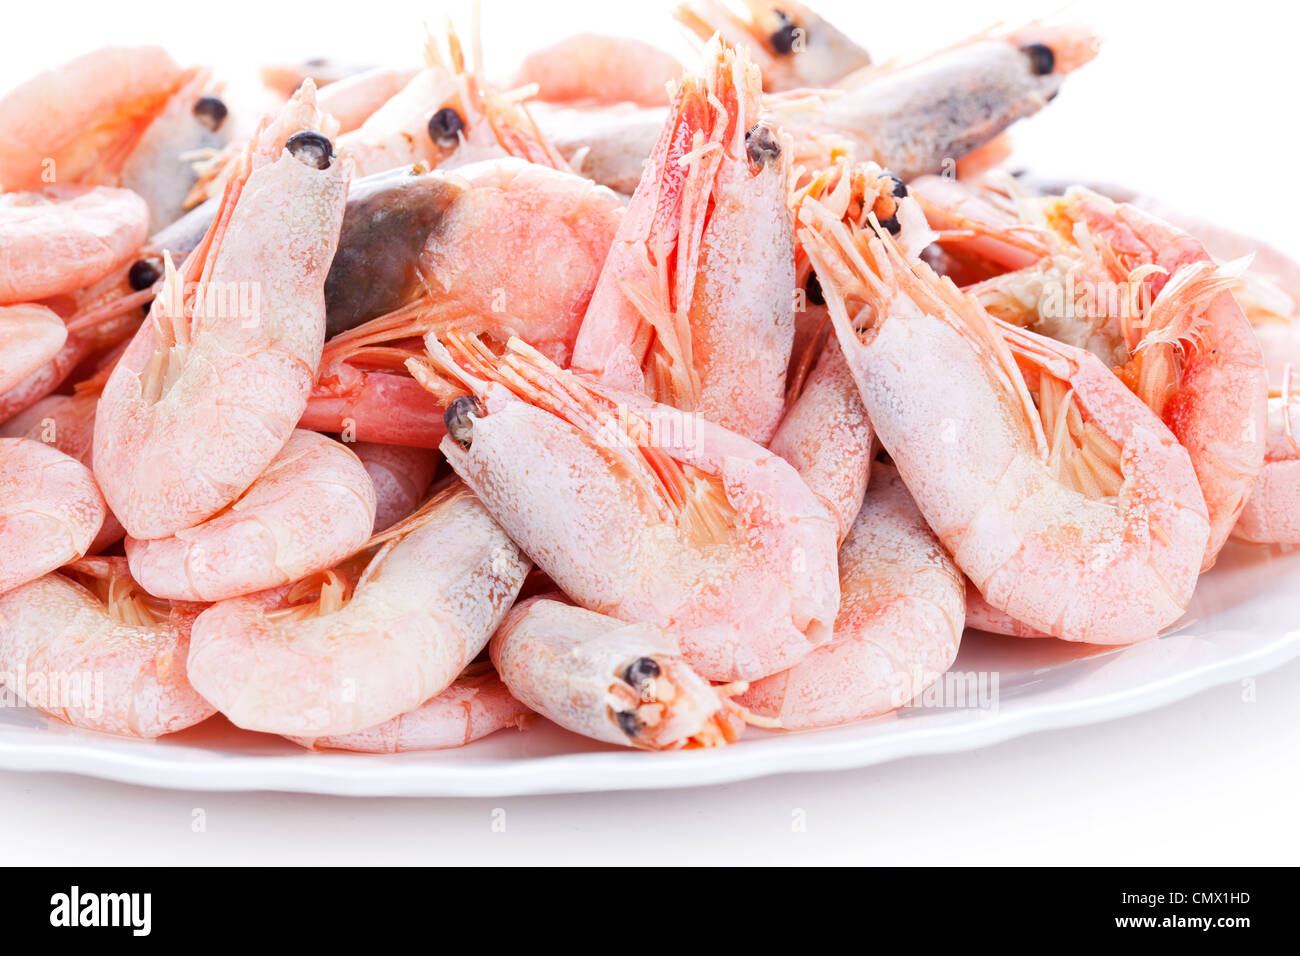 Pile of shrimps on plate, closeup on white background Stock Photo